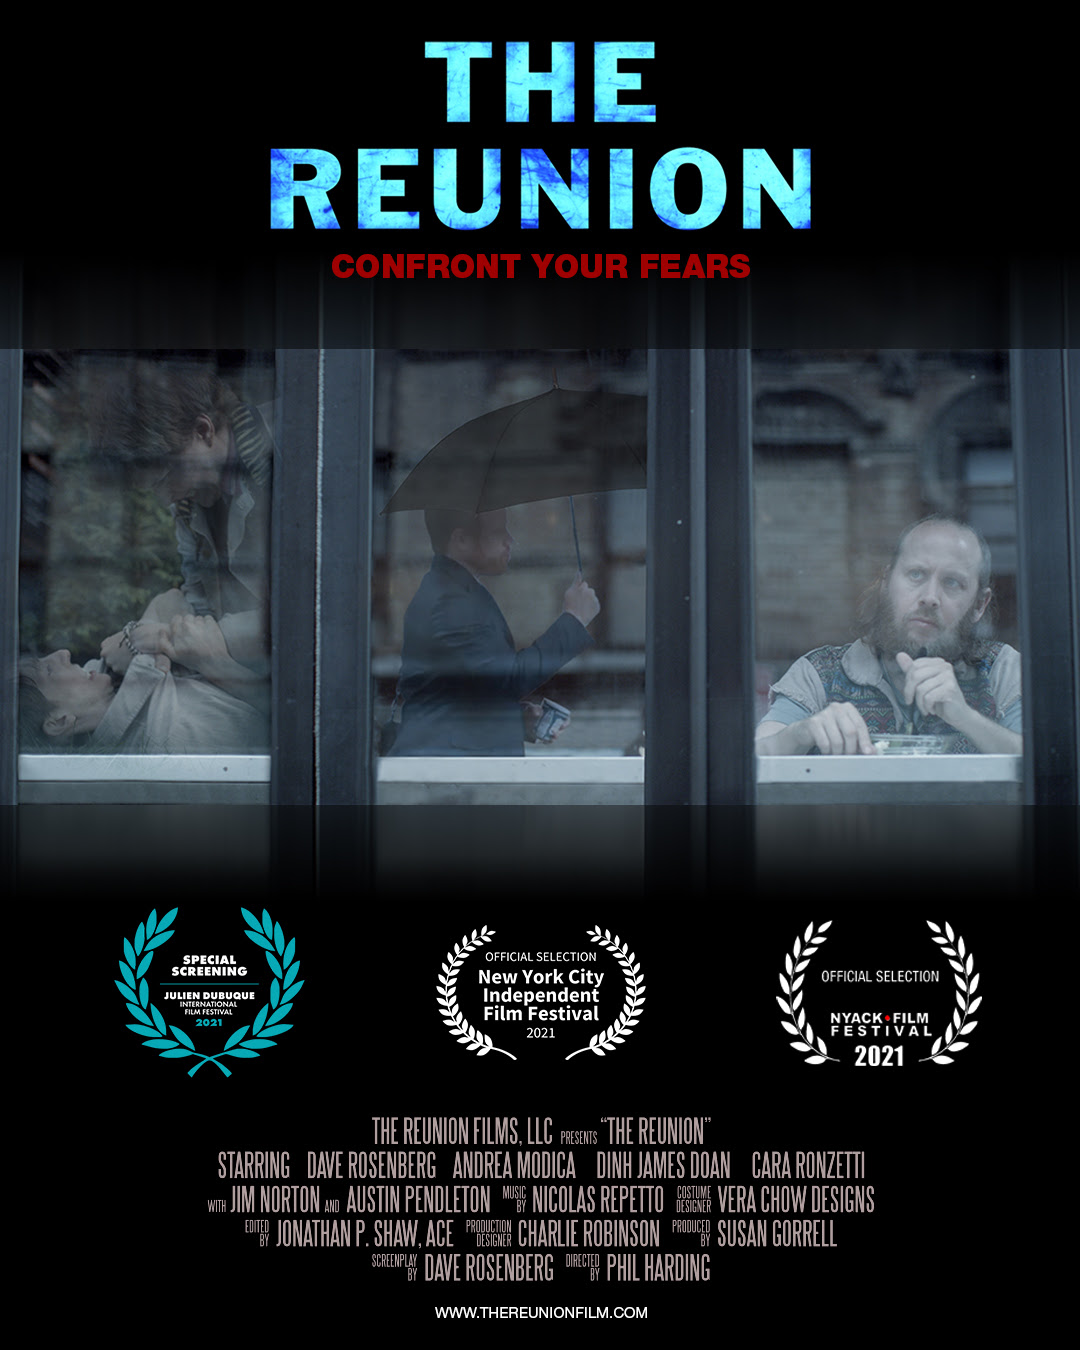 'The Reunion' is a new film by director Dave Rosenberg. Learn more about the film and its old school influences here.